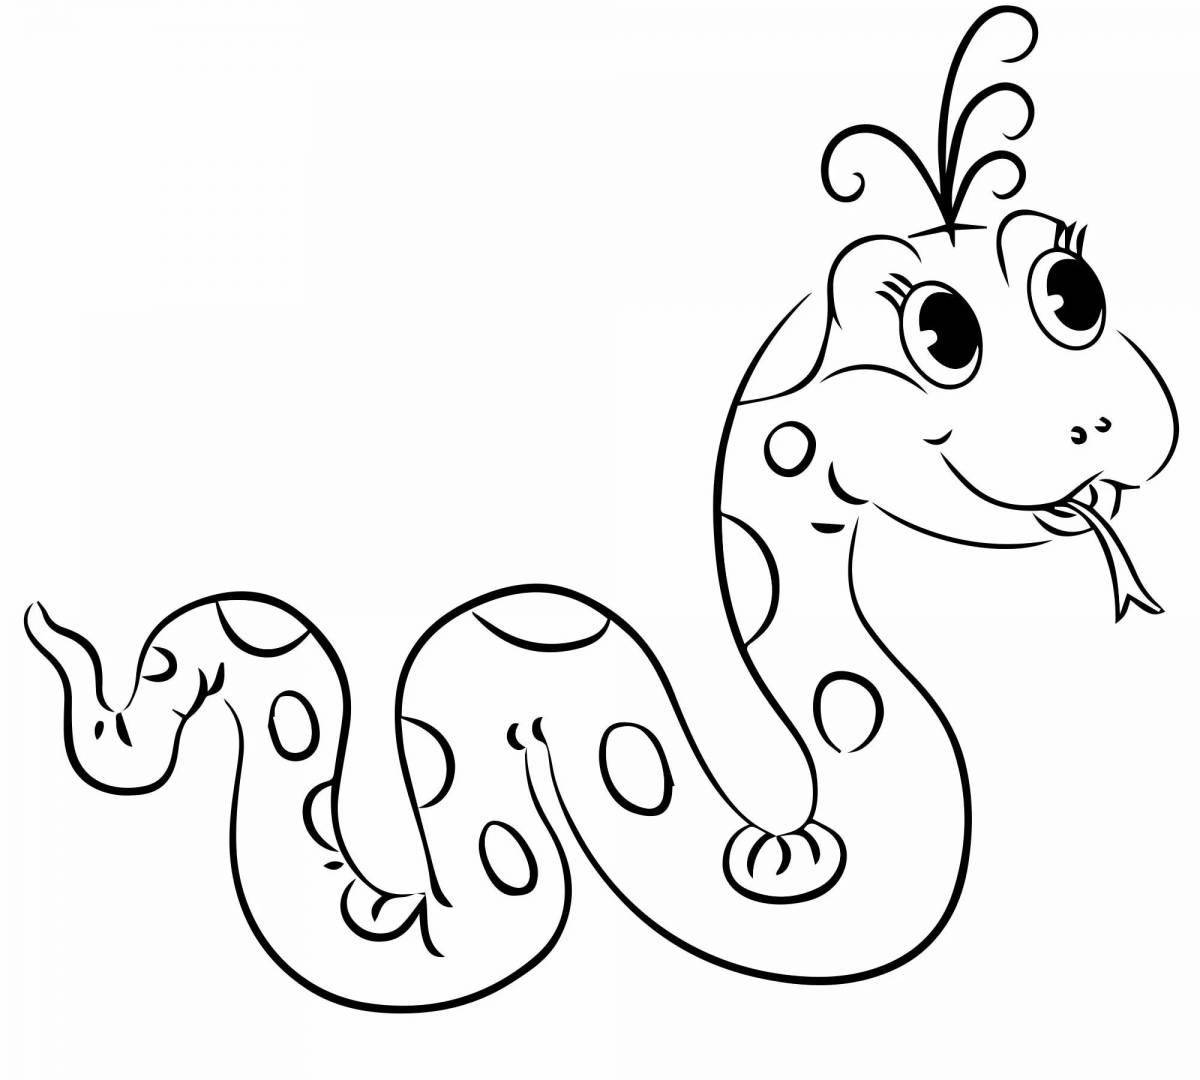 Colorful snake coloring page